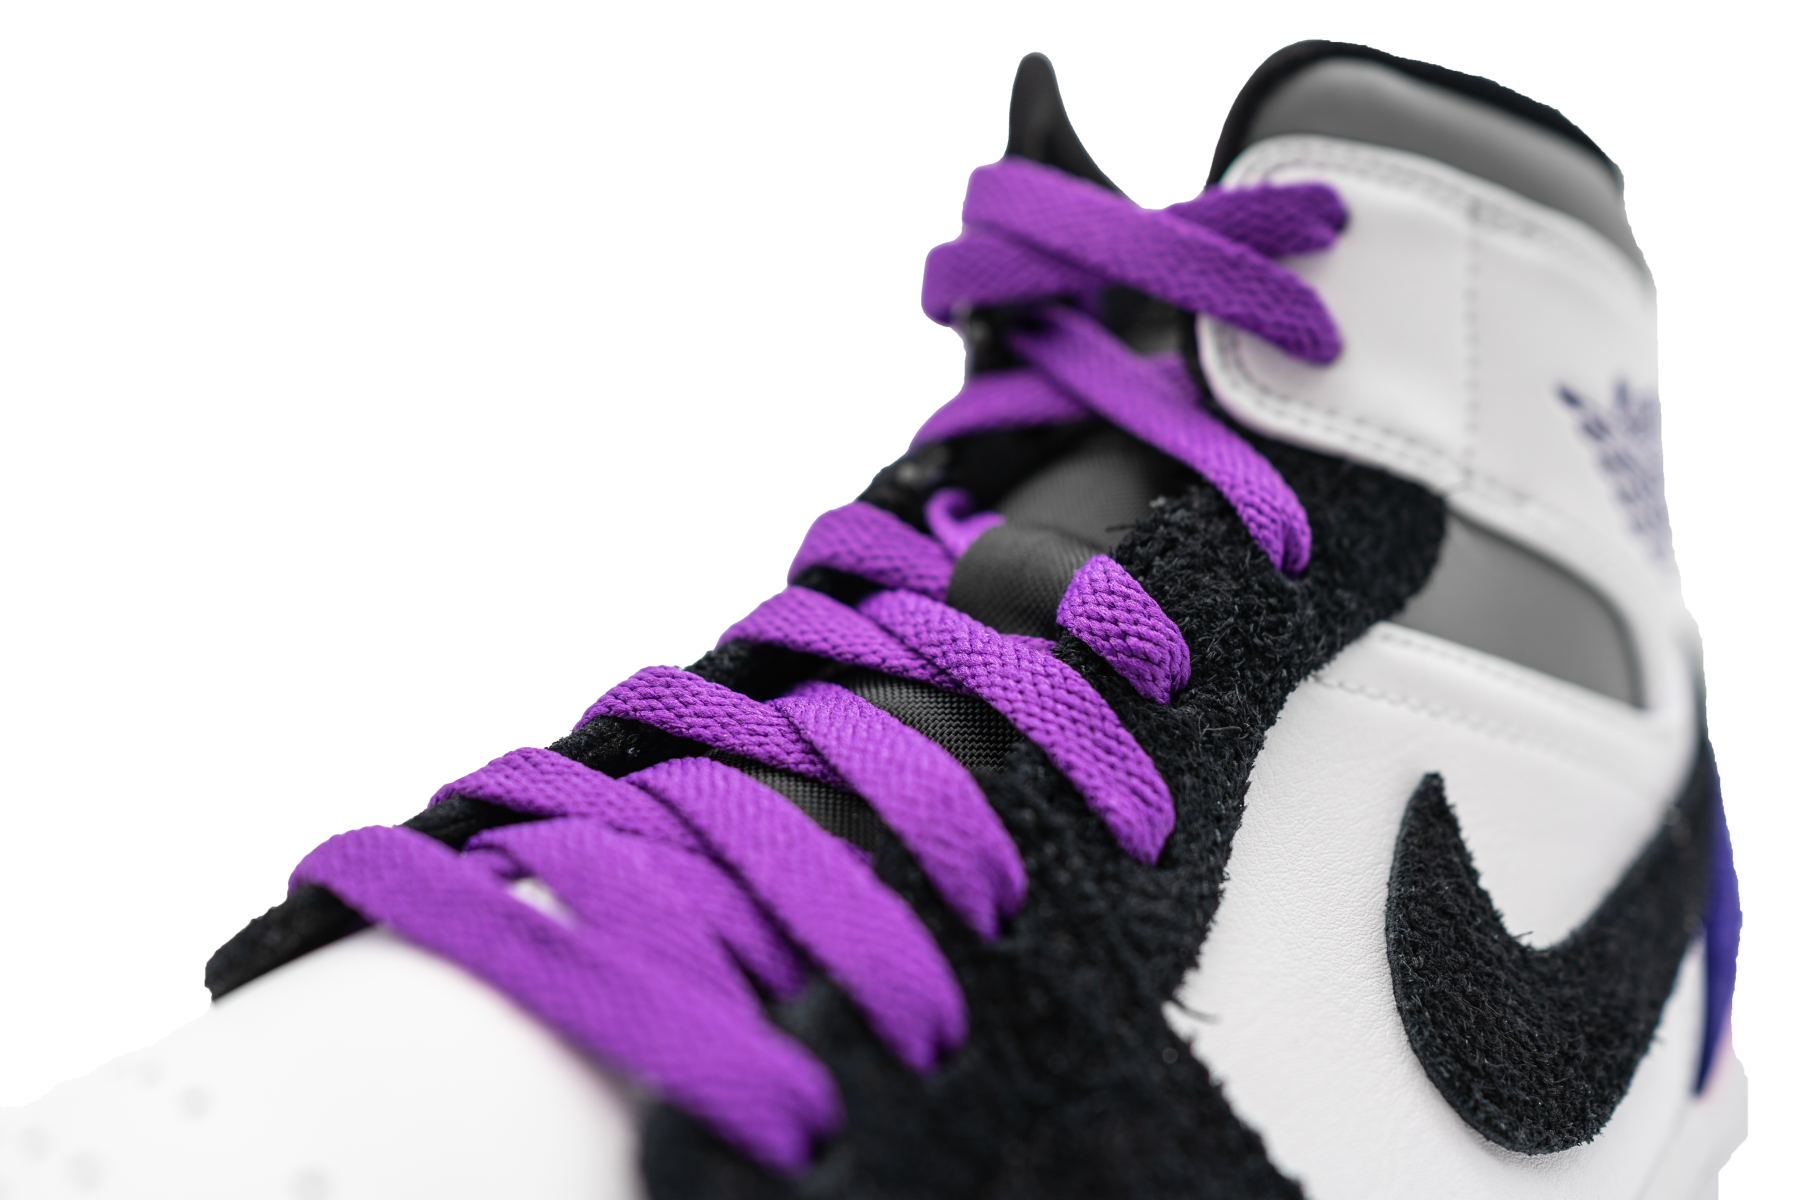 PURPLE SHOELACES FOR SNEAKERS